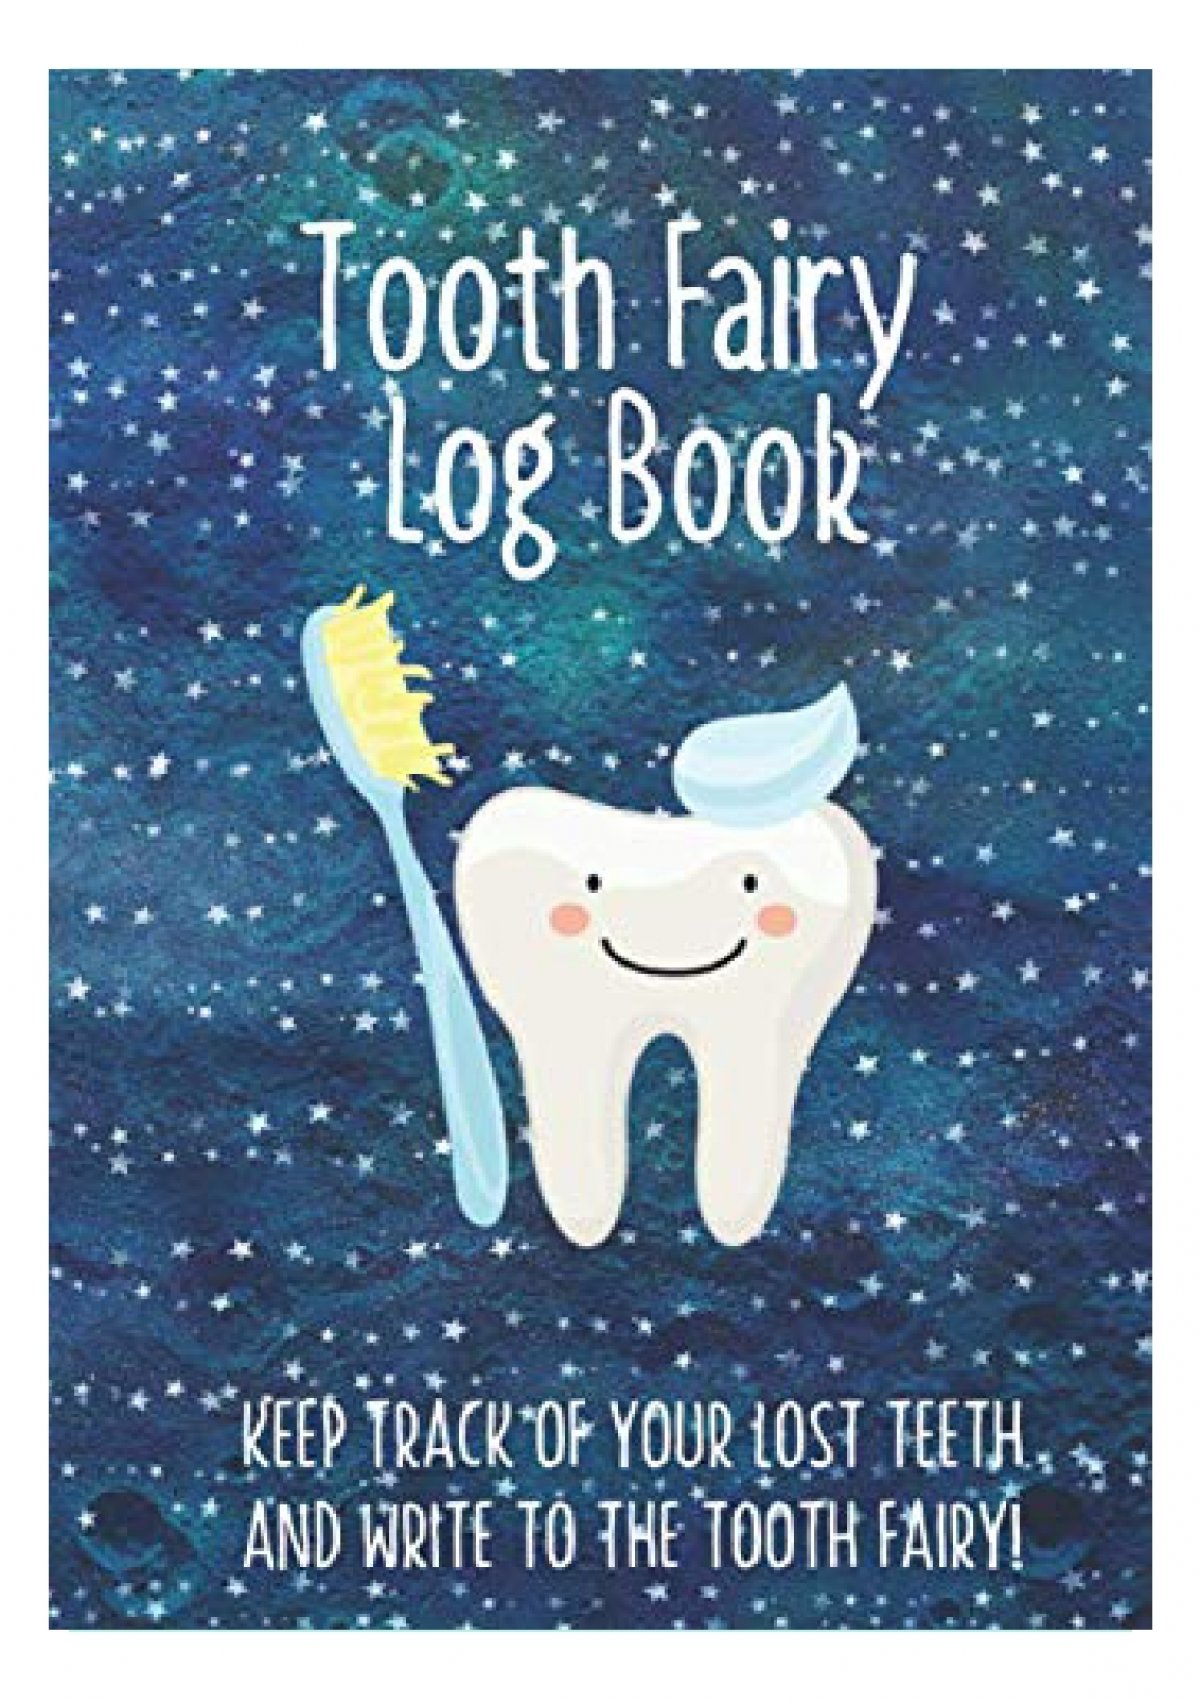 download-tooth-fairy-log-book-keep-track-of-your-lost-teeth-and-write